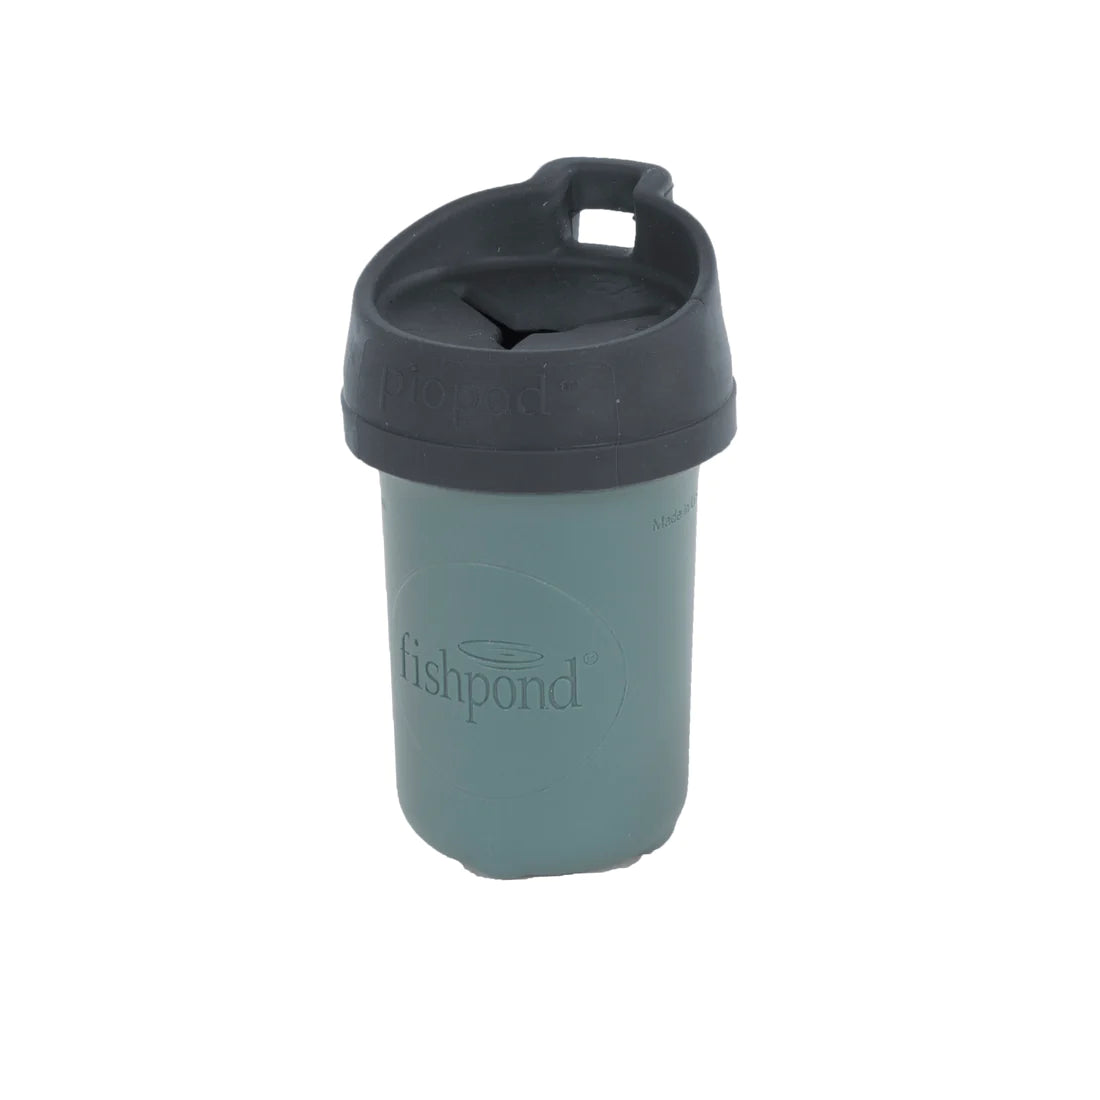 Fishpond PIOPOD Microtrash Containers